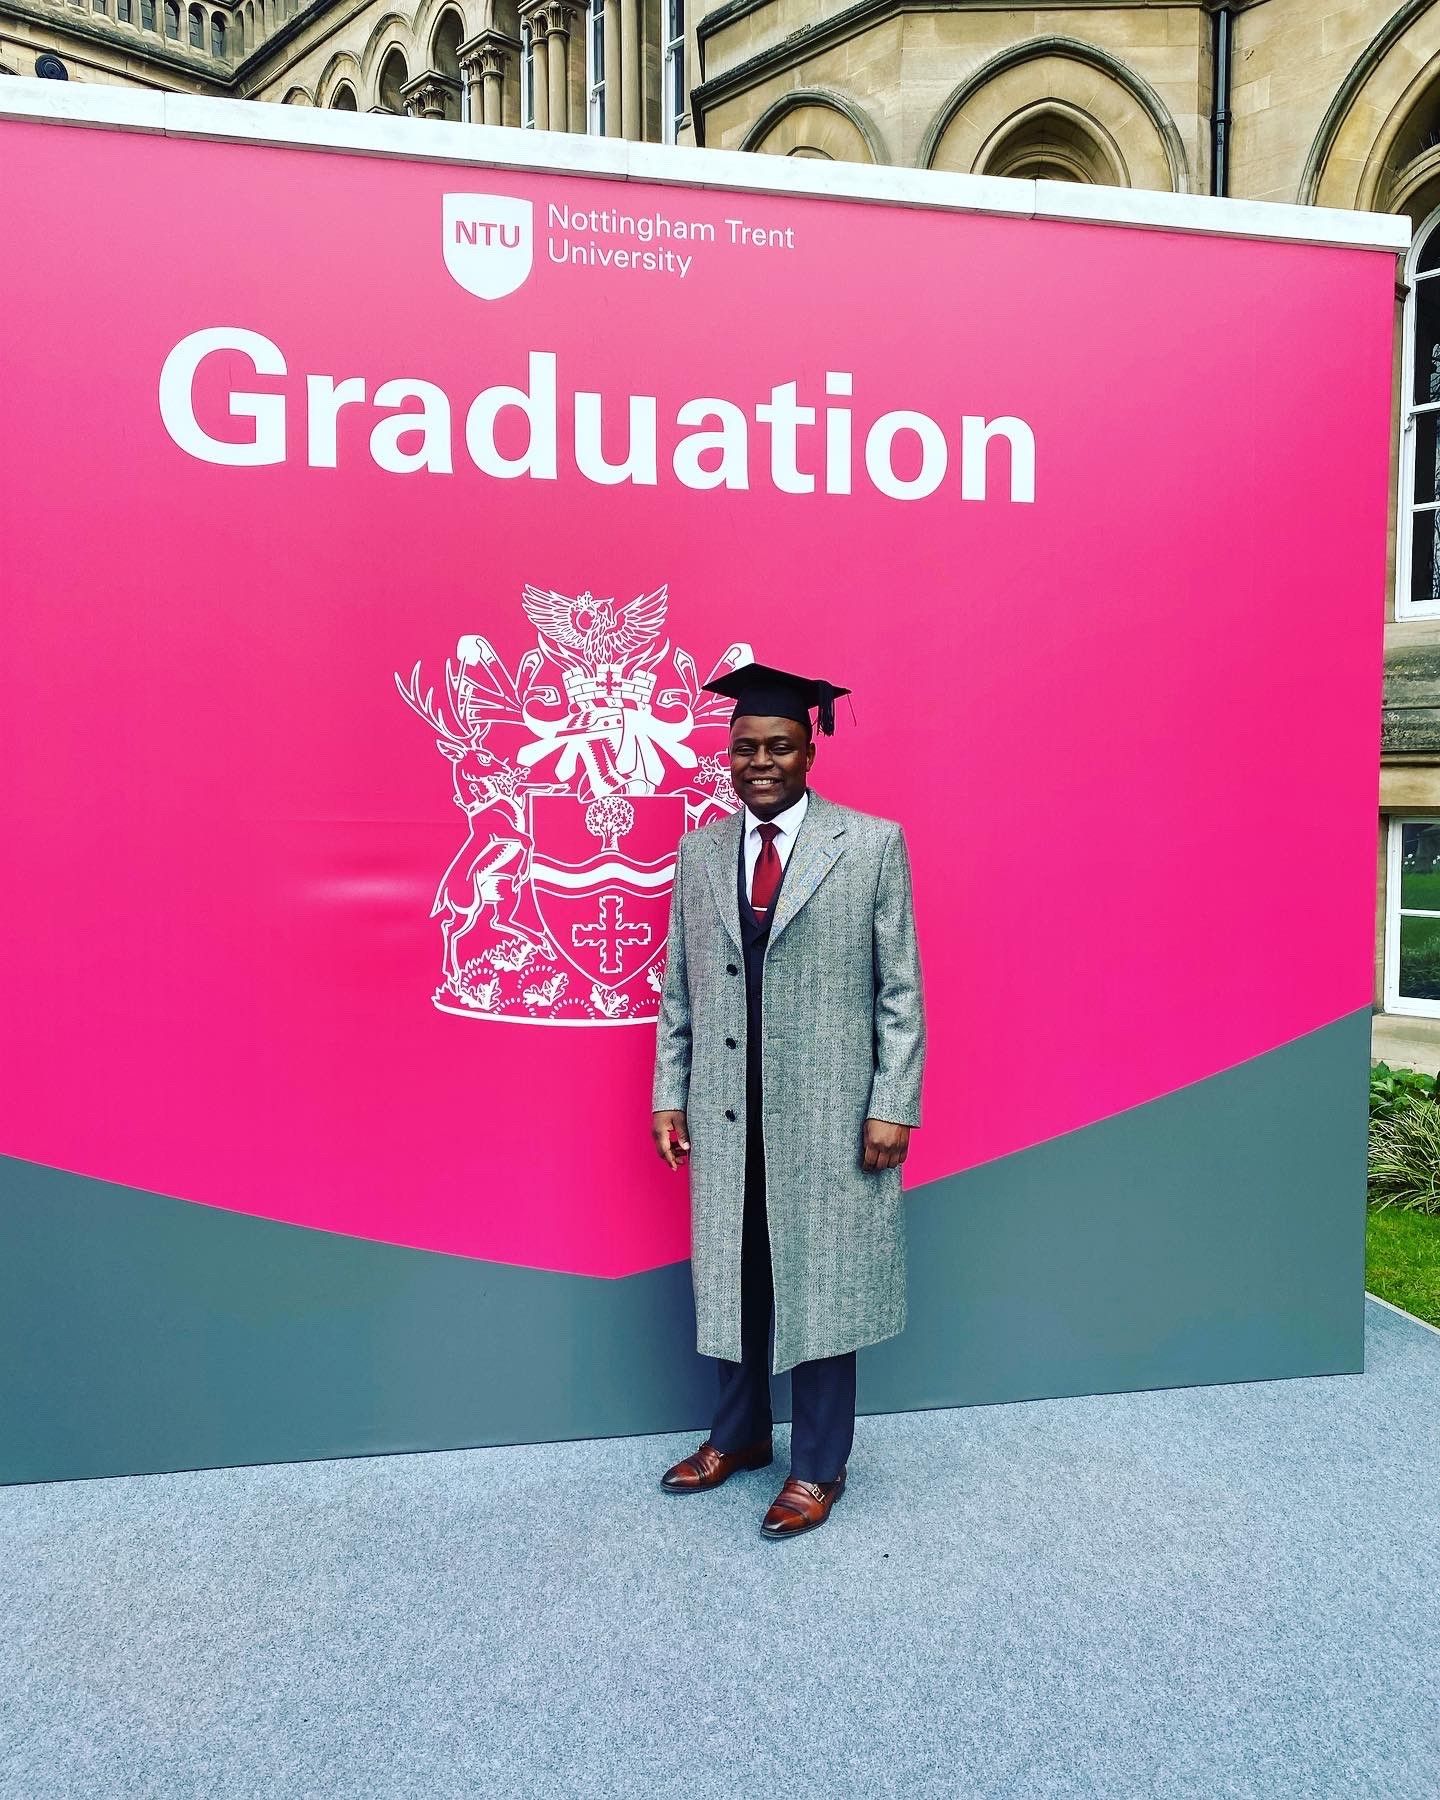 Rodney - who the article is about - stands in front of a big, bright pink banner which says 'Nottingham Trent University Graduation'. He is wearing a graduation mortar-board cap and a long grey jacket and smart shoes. He is smiling.